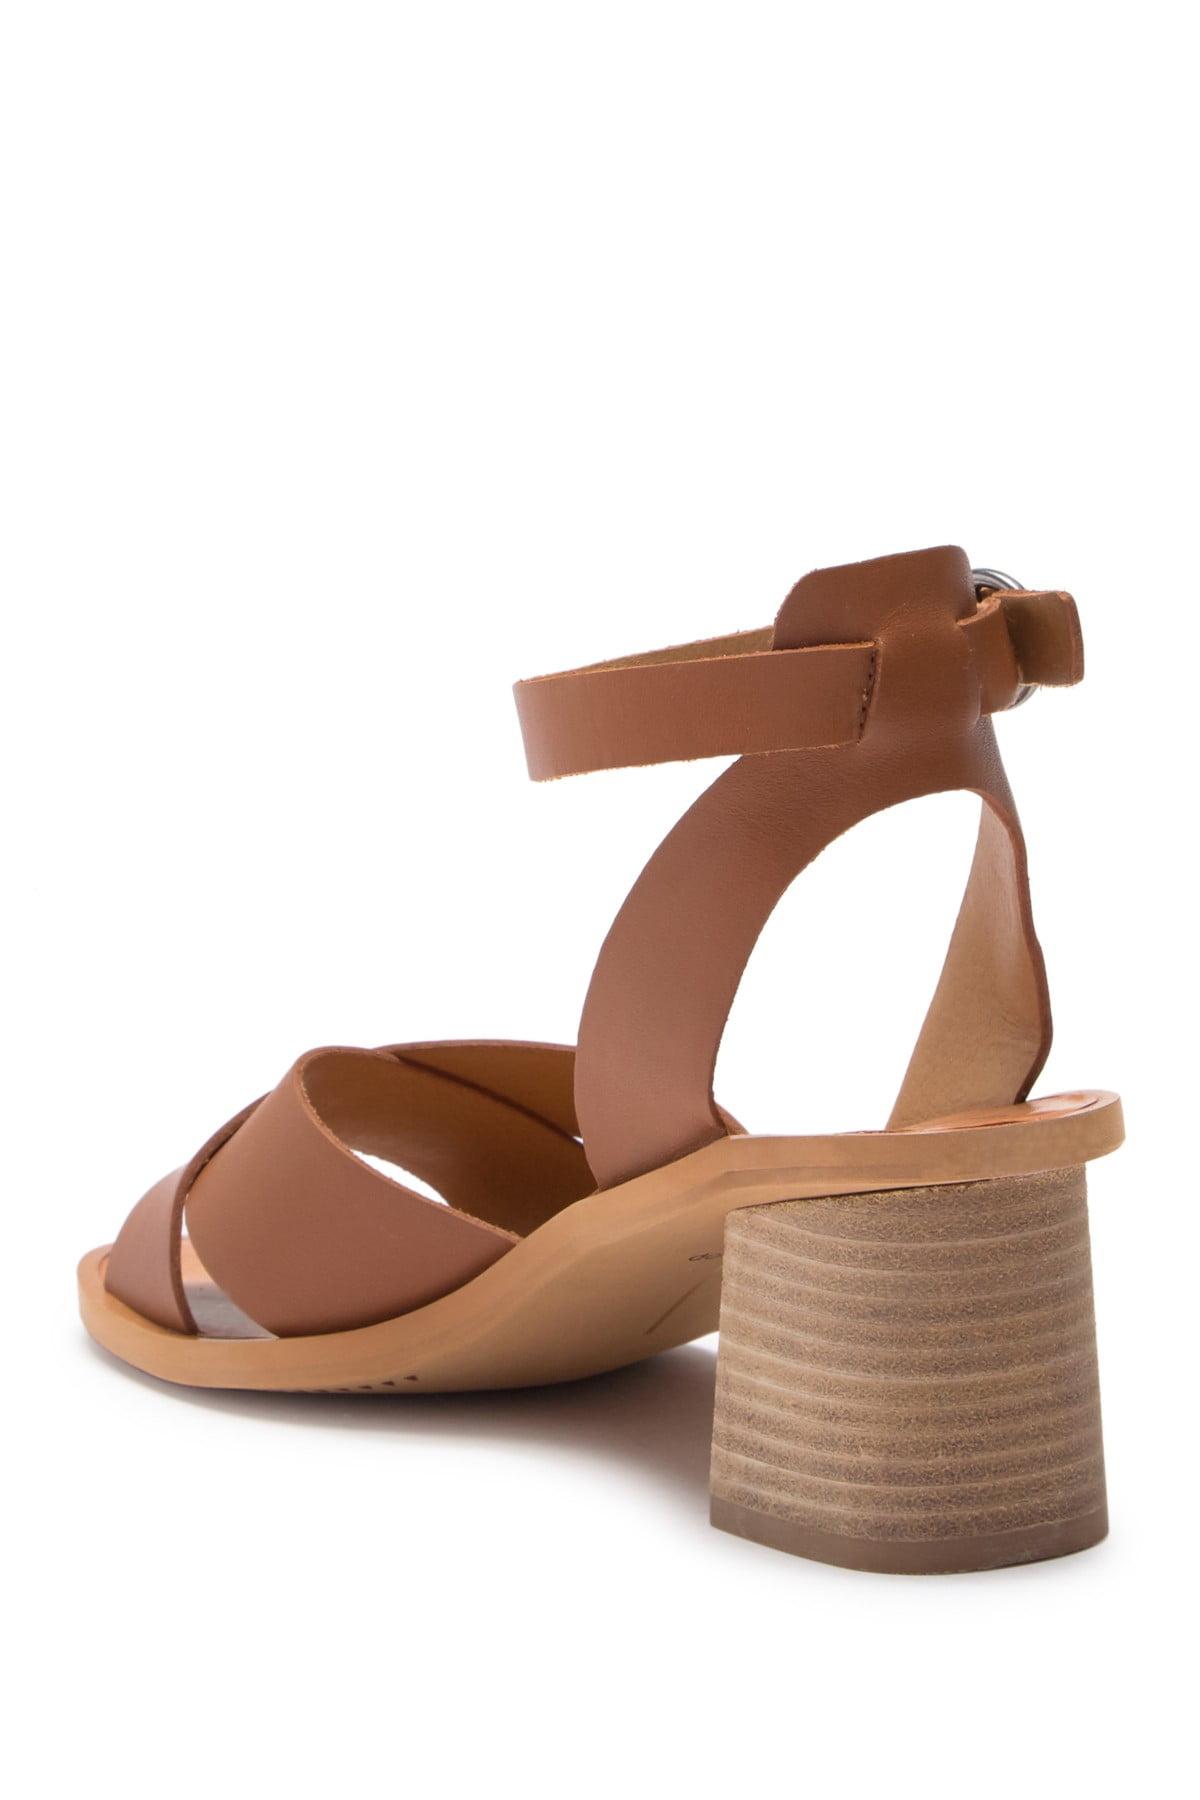 Dolce Vita Suede Rayna Stacked Sandal 